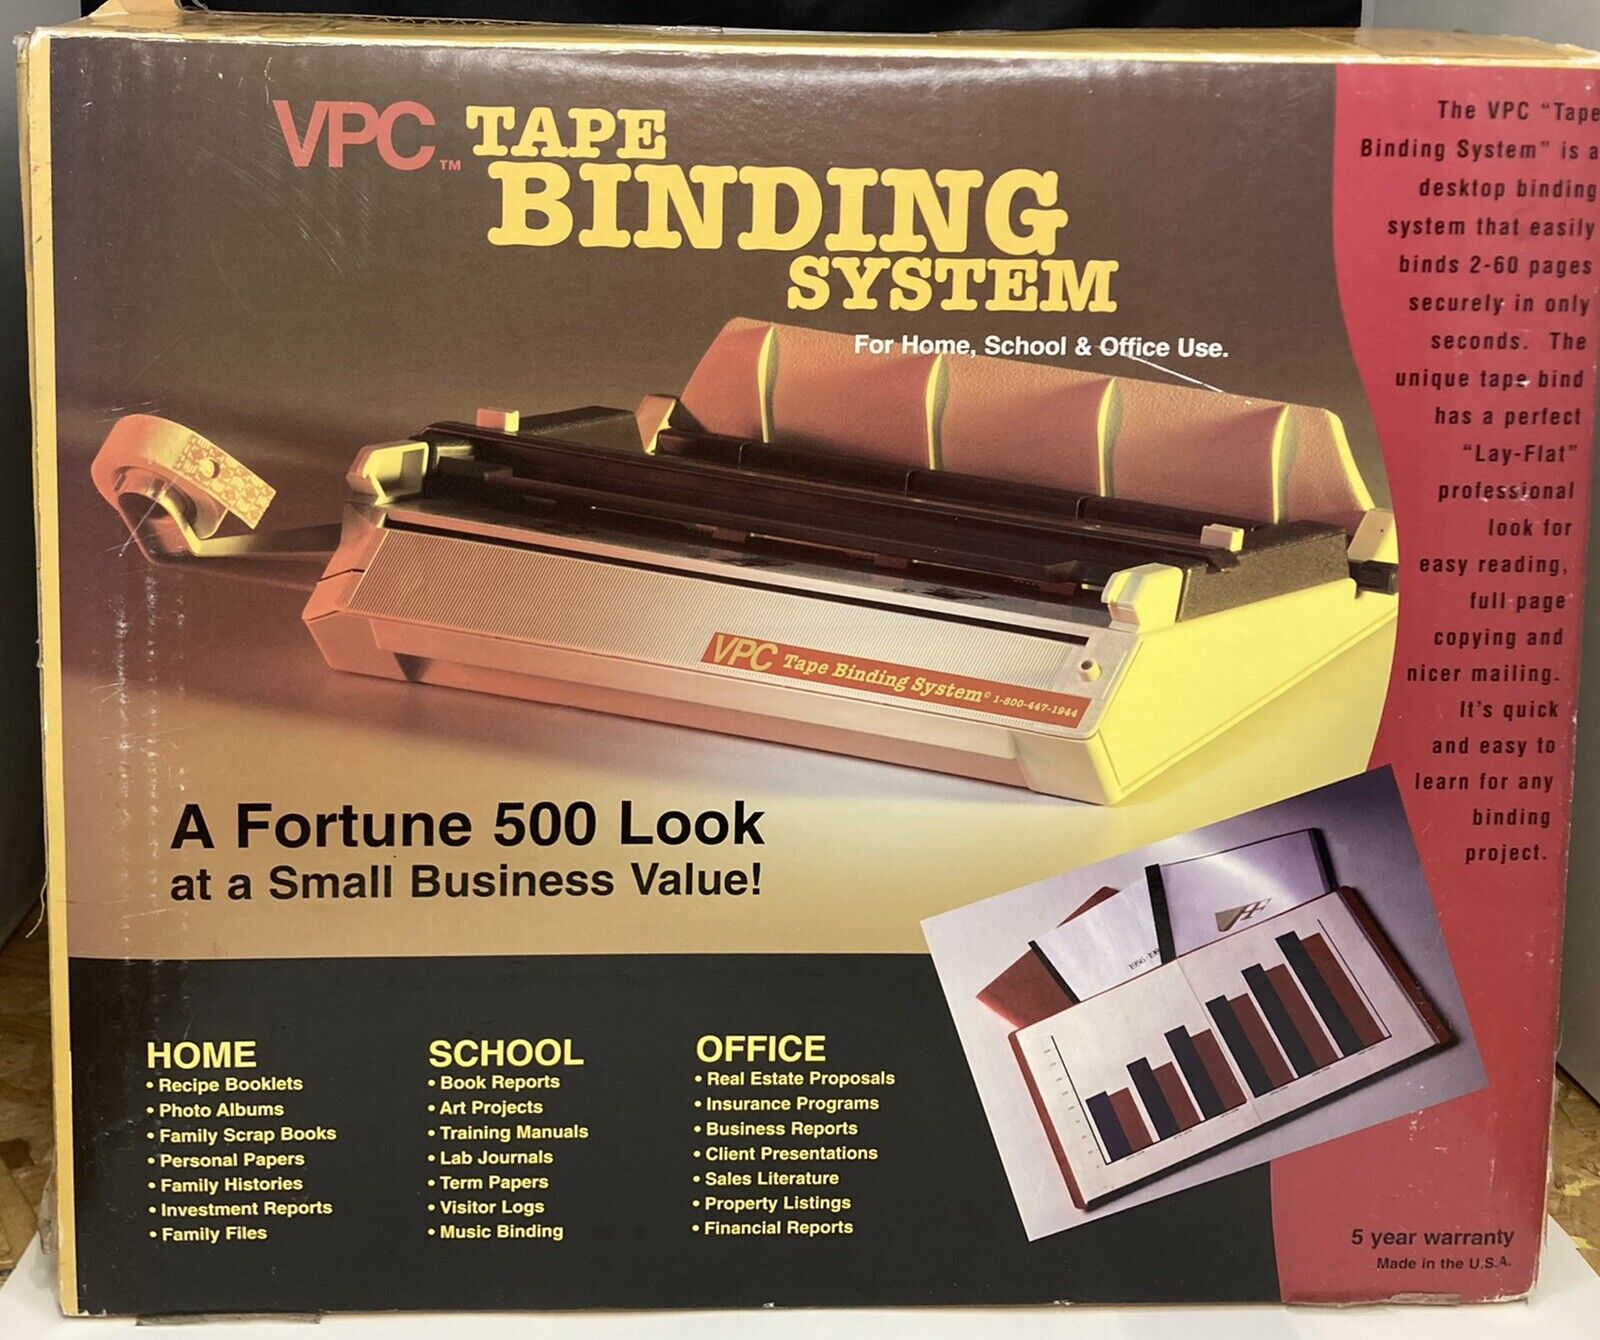 Vpc Tape Binding System For Home, School, & Office Use Model 7890 New Old Stock